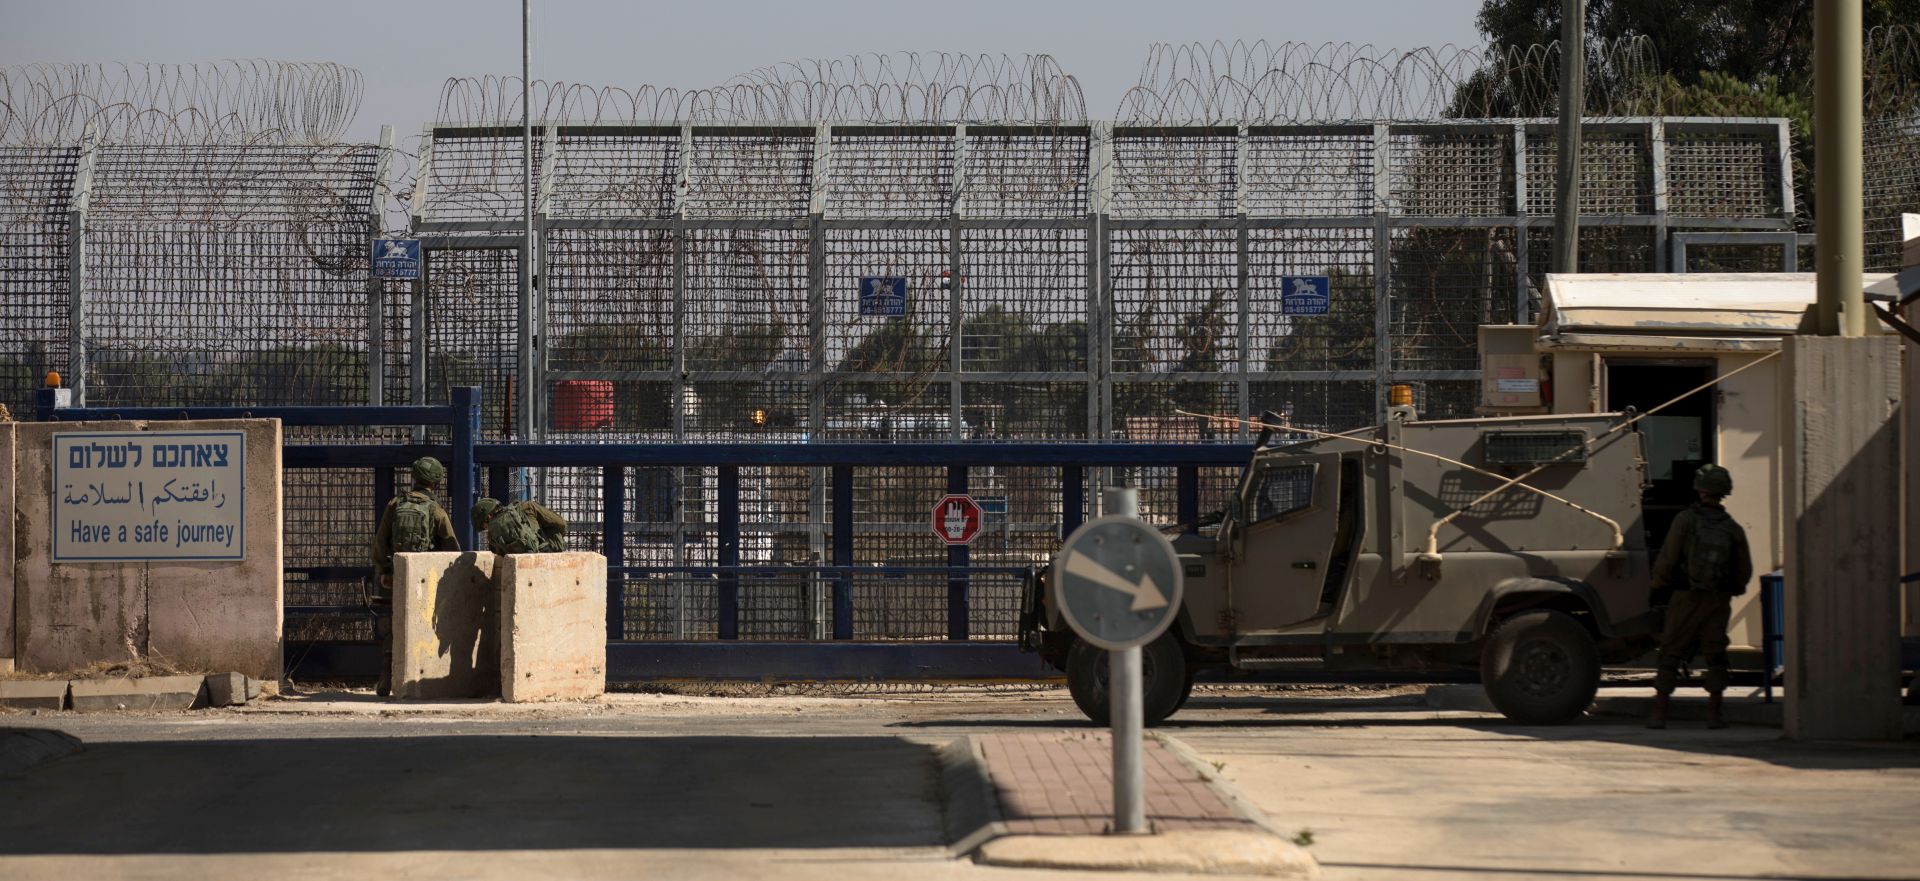 epa07453956 (FILE) - Israeli soldiers stand guard at the Quneitra crossing in the Golan Heights, the only border crossing between Israeli and Syria, 27 September 2018 (reissued 21 March 2019). US President Trump said in a tweet on 21 March 2019, that 'it is time for the United States to fully recognize Israel's Sovereignty over the Golan Heights' adding that it is of 'critical strategic and security importance to the State of Israel and Regional Stability.' Israel captured much of the Golan region from Syria in 1967 and then annexed it in 1981, a move that was never international recognized. Trump's remarks came as US Secretary of State Pompeo is on a trip in the Middle East and visited Jerusalem on the day.  EPA/ATEF SAFADI *** Local Caption *** 54656838